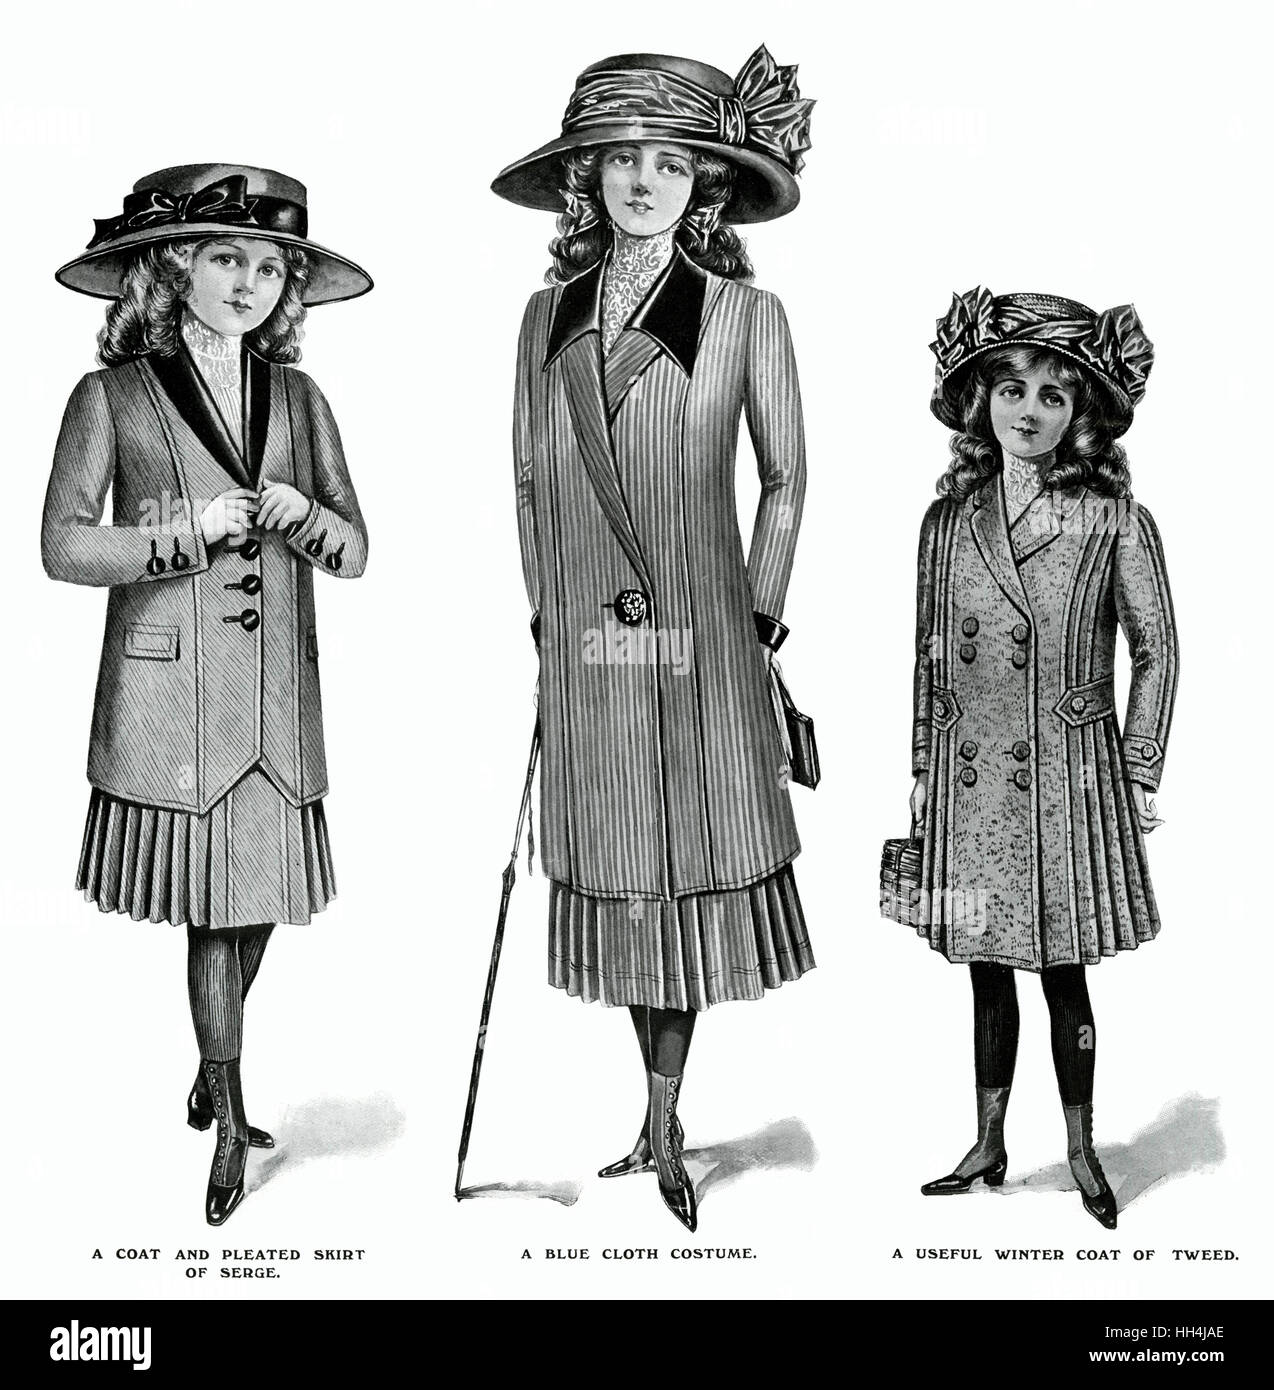 Schoolgirls' autumn clothing, (left) single breasted jacket with pleated skirt of serge, (middle) smart three quarter length single breasted striped coat with black trim and collar and pleated skirt, (right) double breasted tweed coat long enough to cover Stock Photo